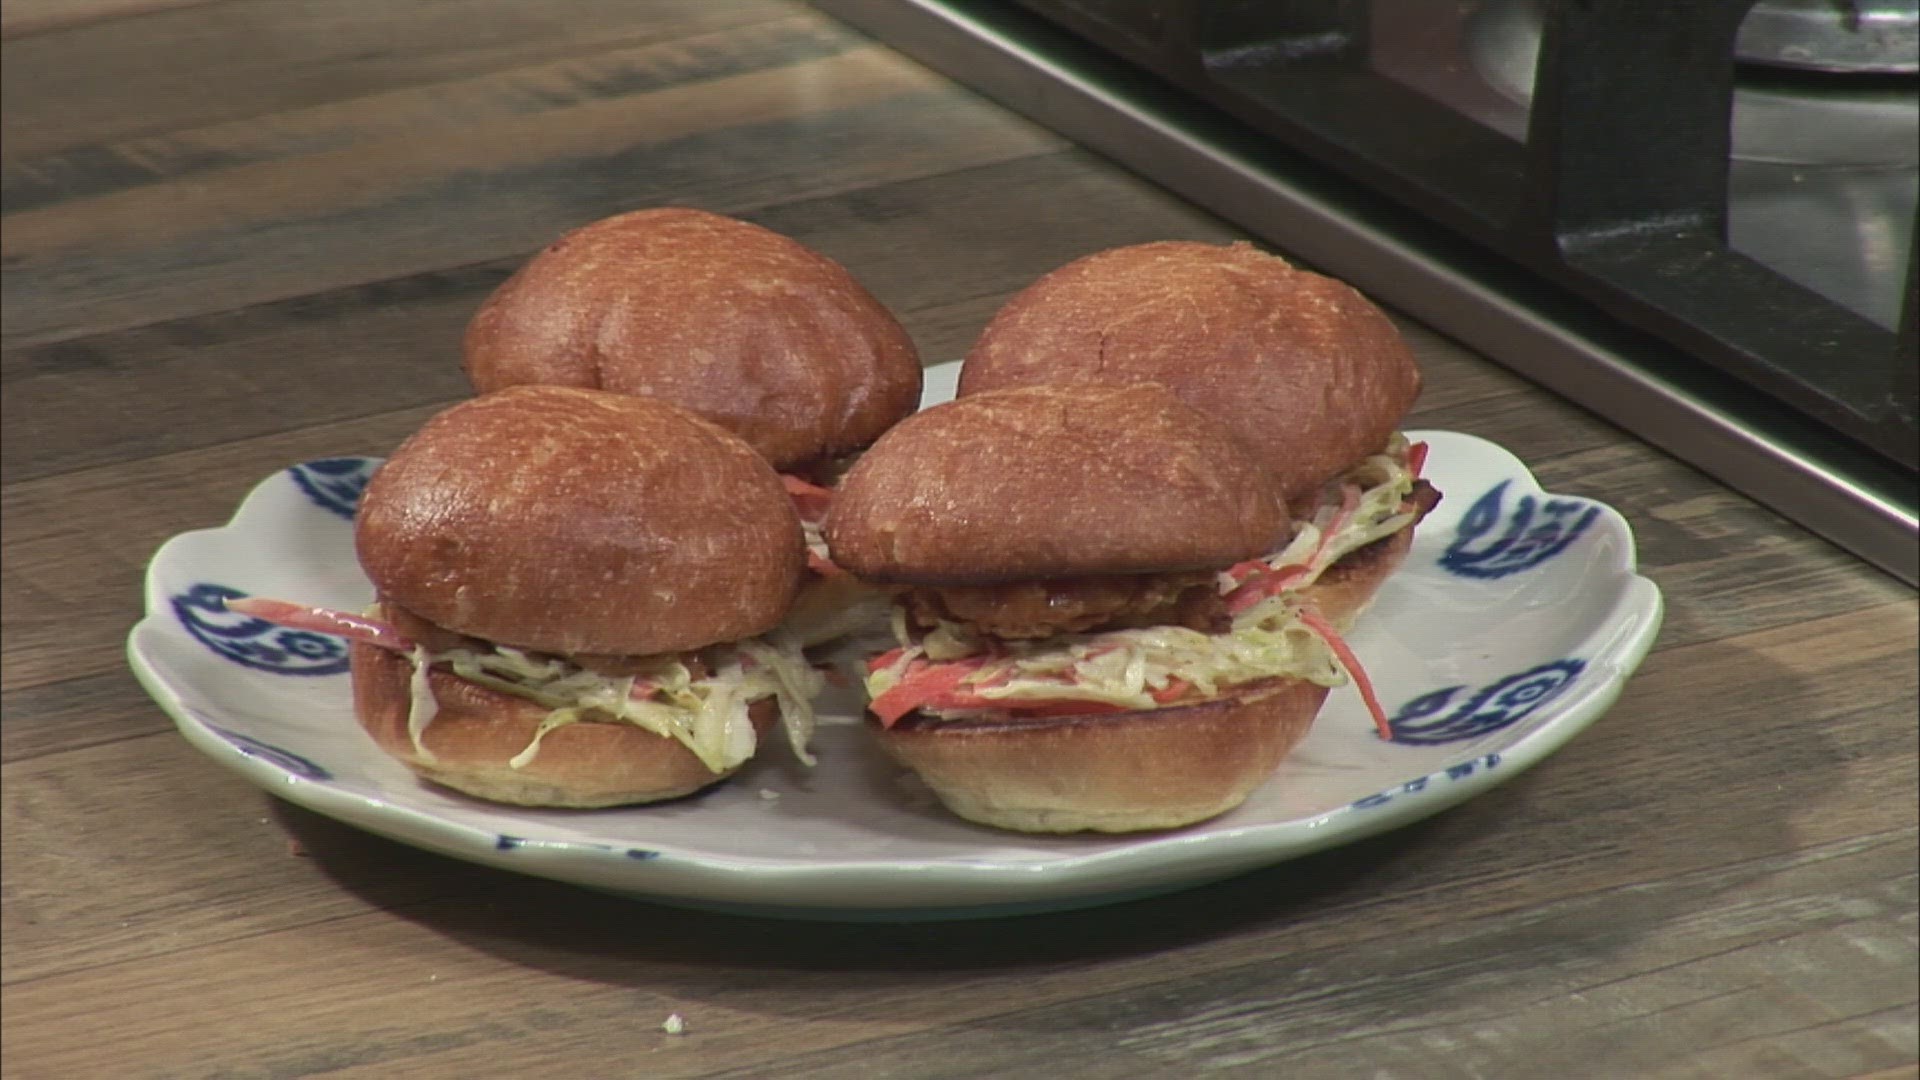 Alex Wight from Crown Jewel shares a recipe for oyster sliders and says it’s a good way for people who may not like oysters to ease into them.